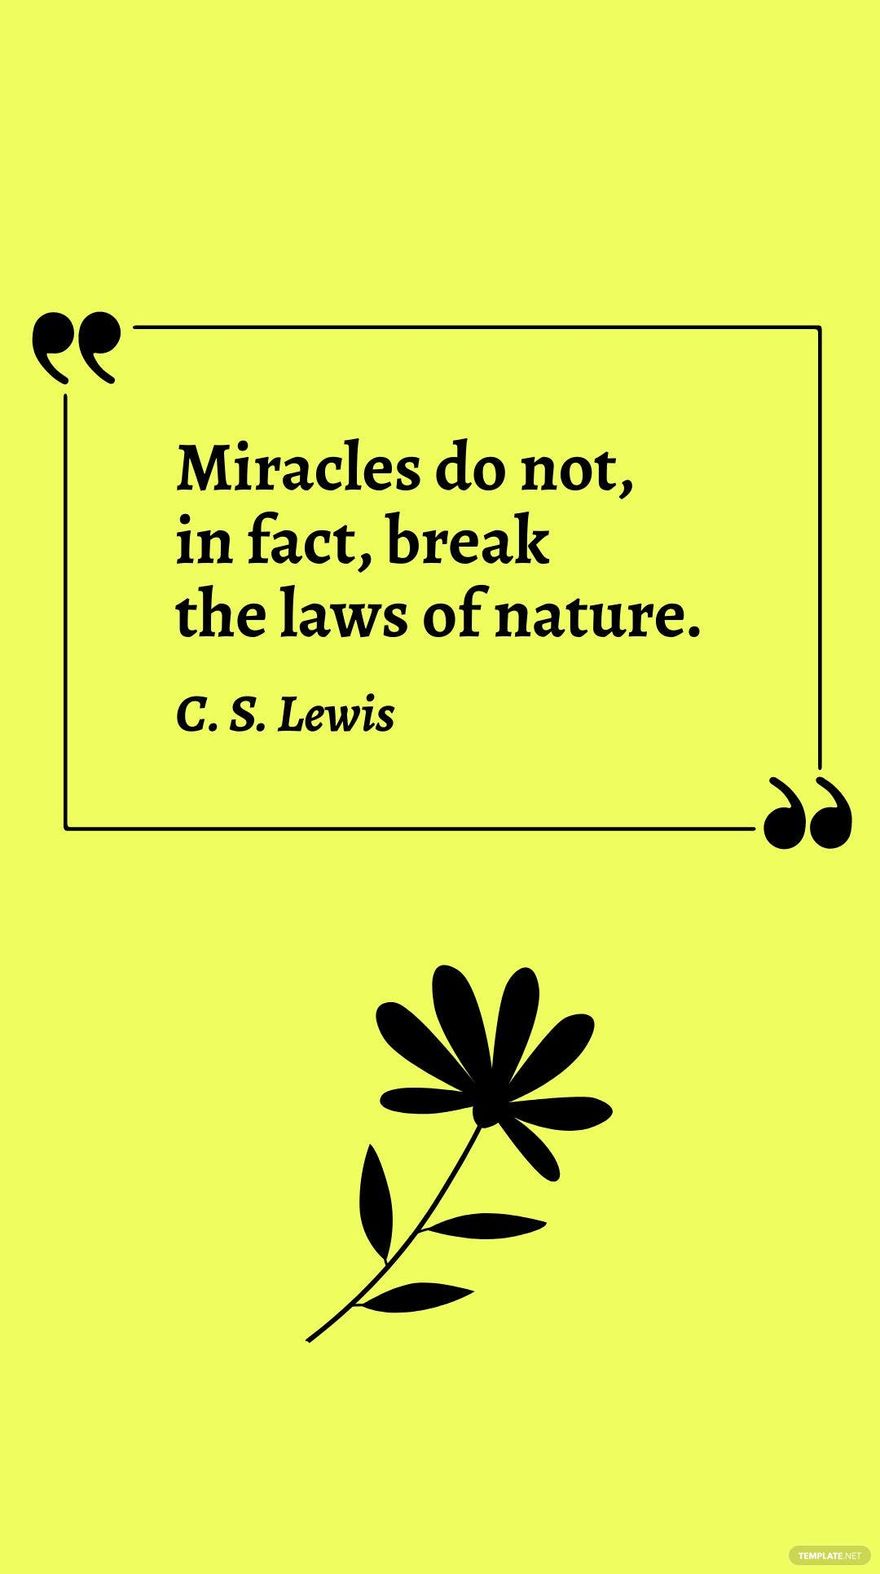 C. S. Lewis - Miracles do not, in fact, break the laws of nature.